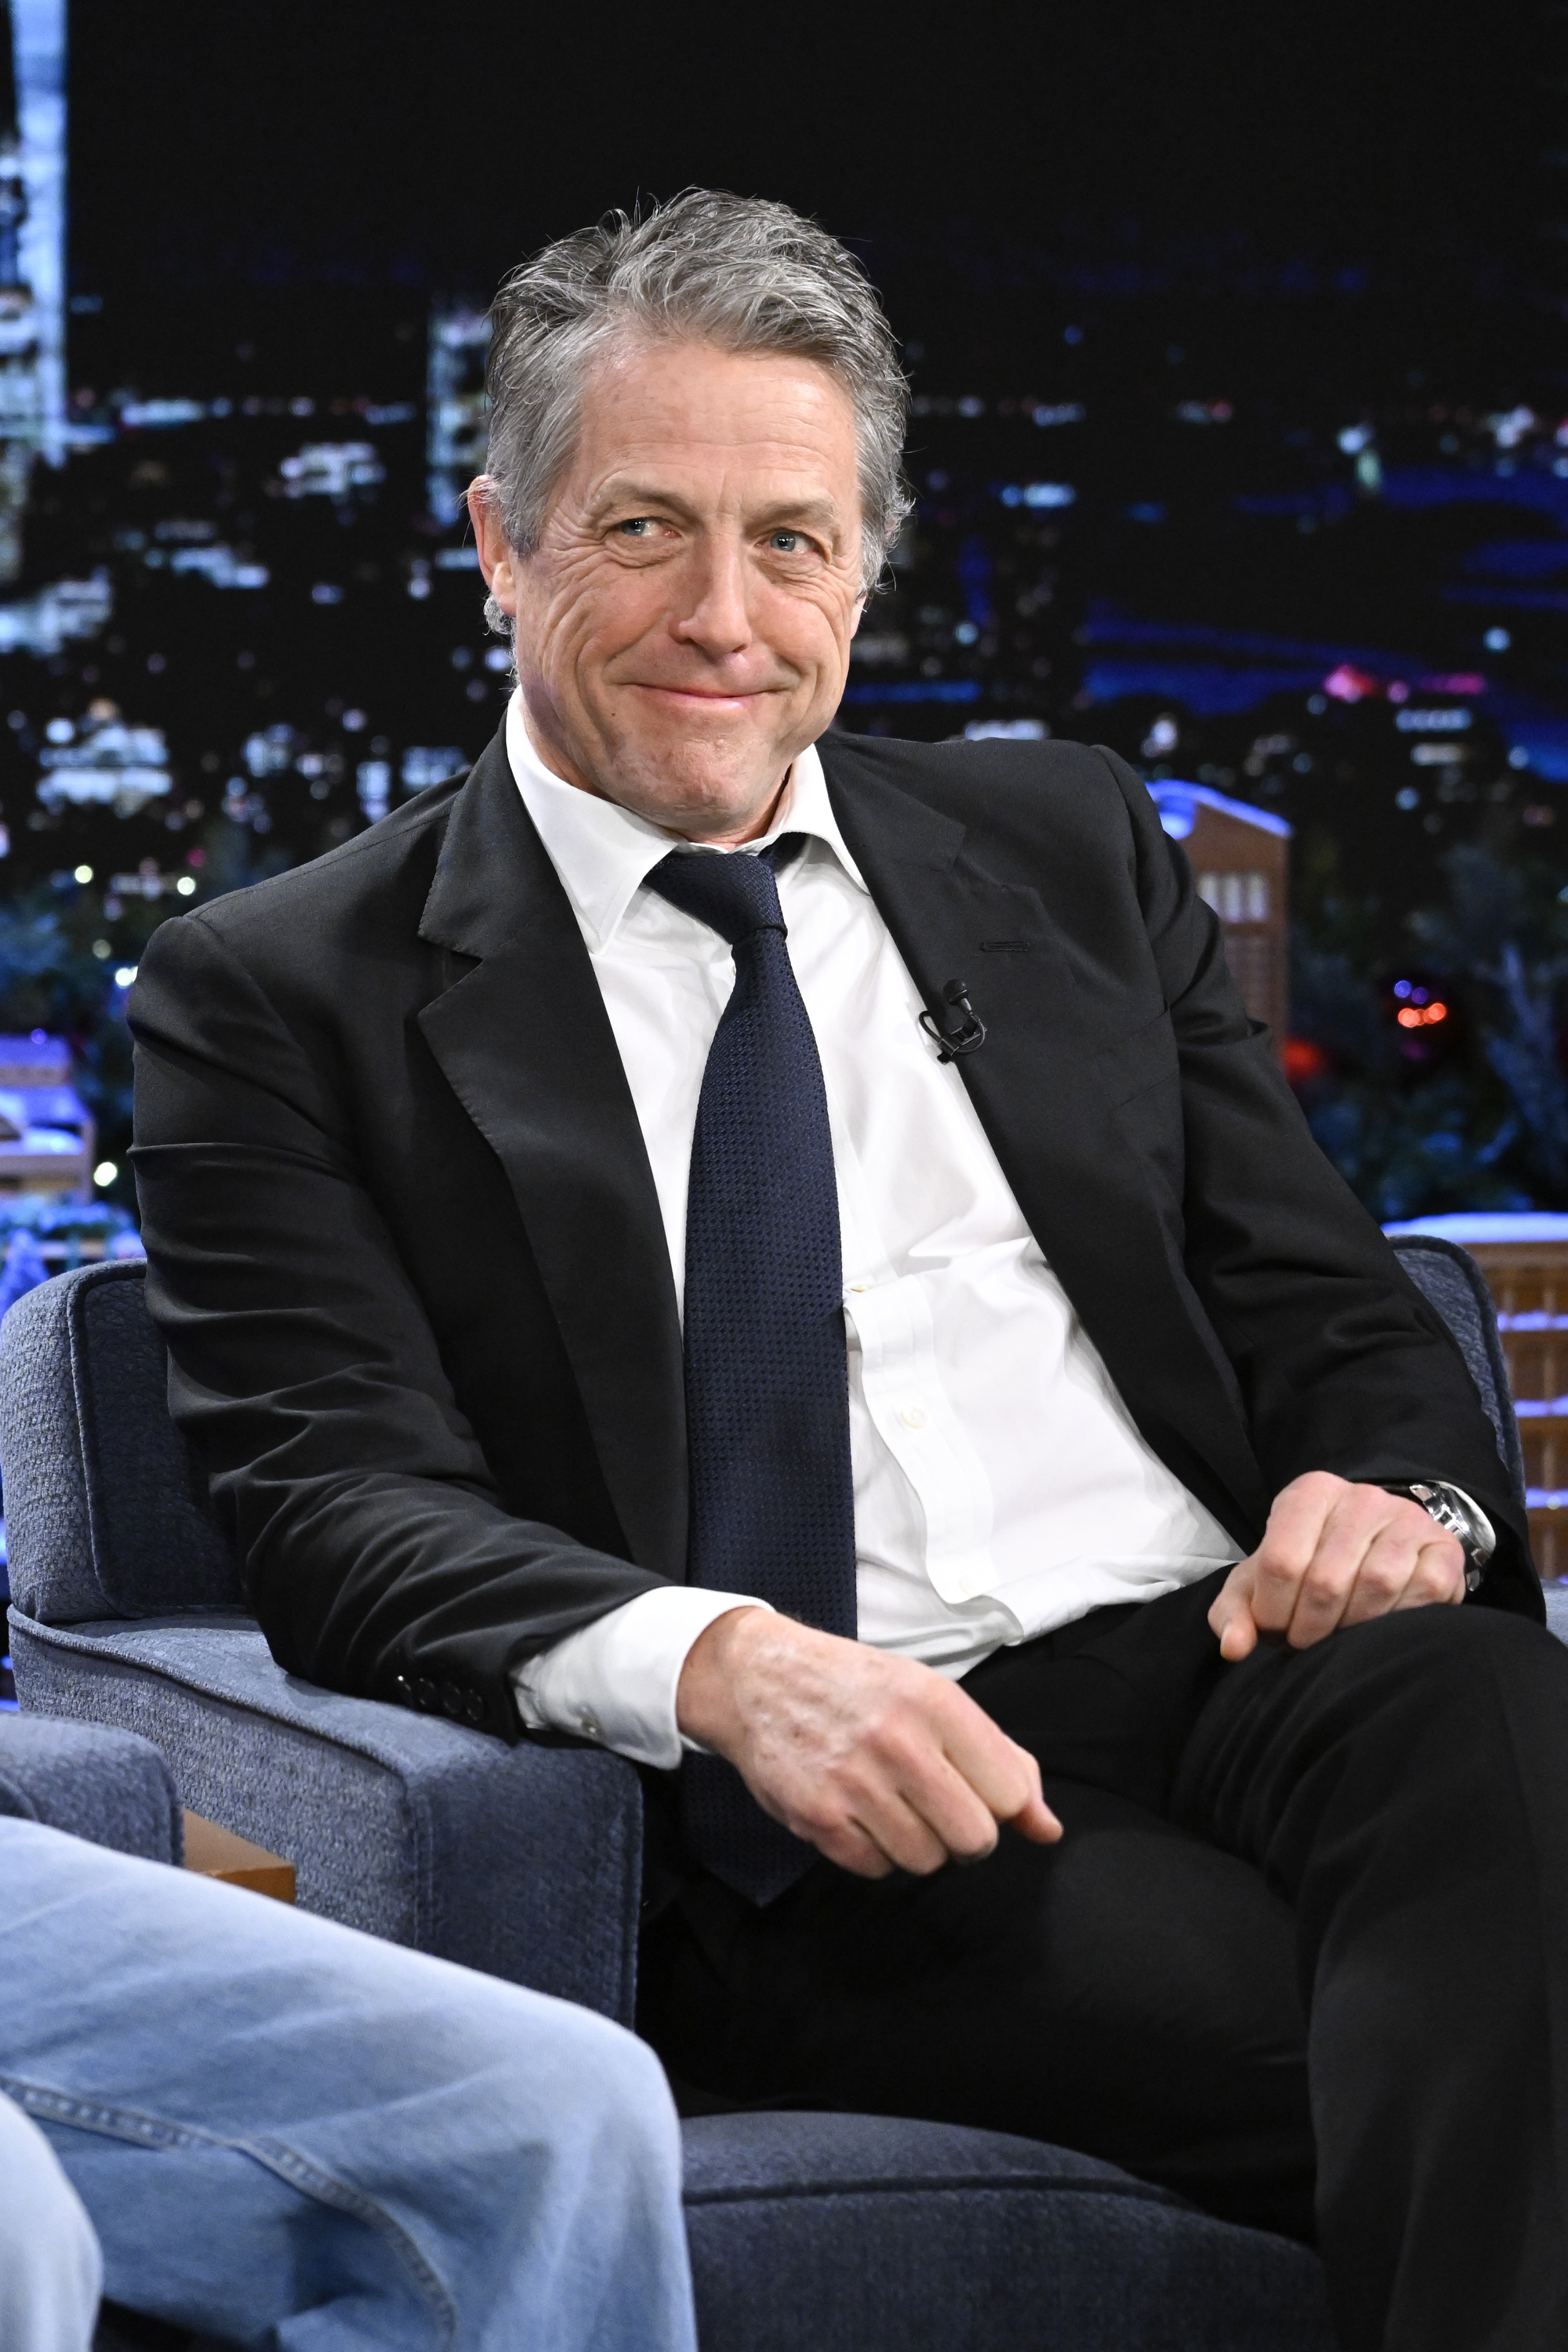 Close-up of Hugh smiling in a suit and tie on a talk show